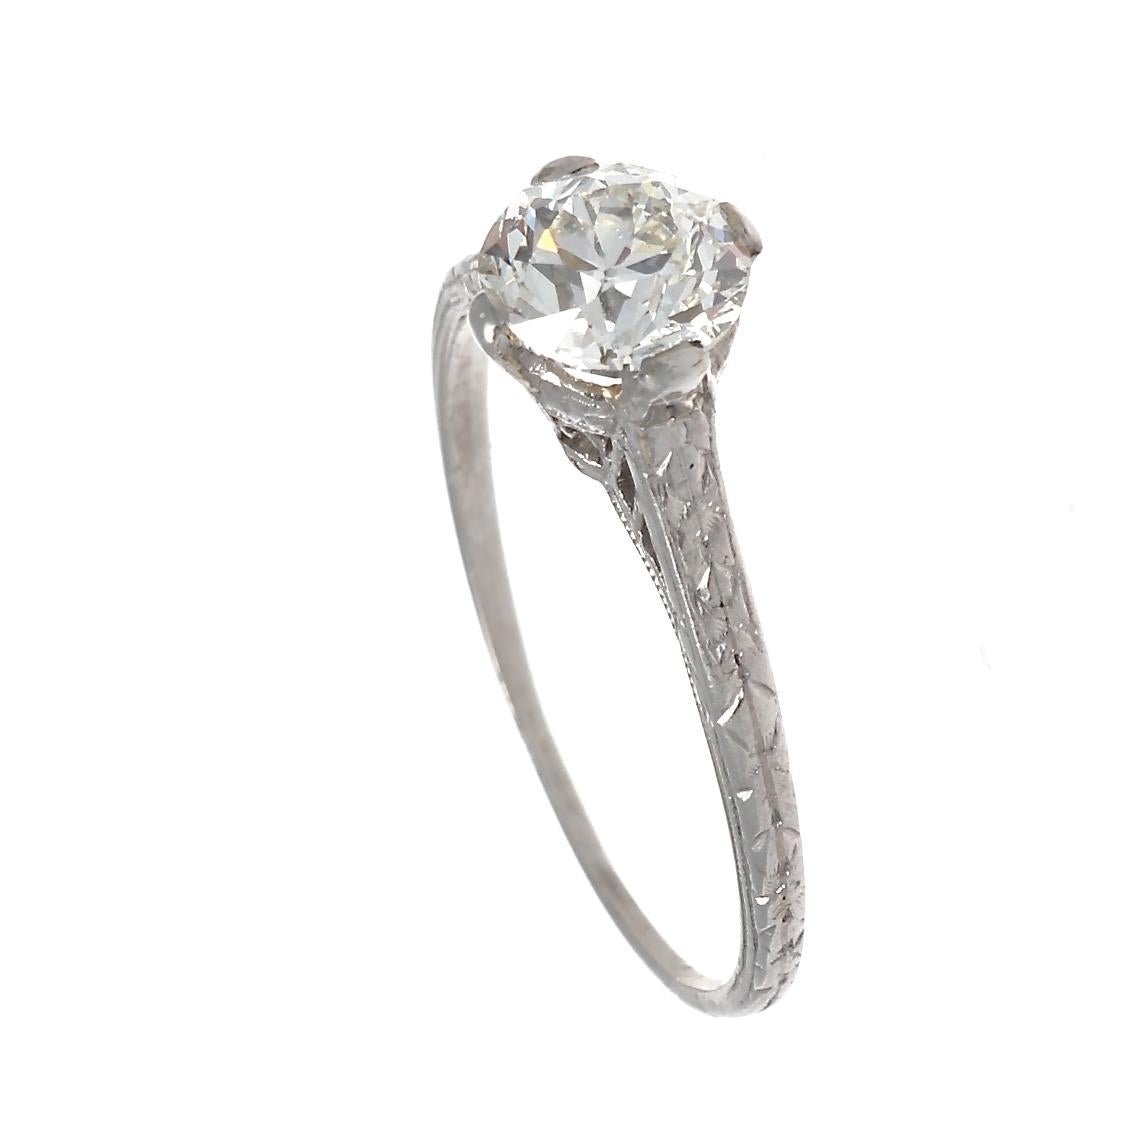 Diamonds represent strength, longevity and intrinsic beauty. There is no better way to say I love and I want to spend my with you. Featuring a 1.01 carat old European cut diamond that is GIA certified as K color, SI1 clarity. Delicately hand crafted